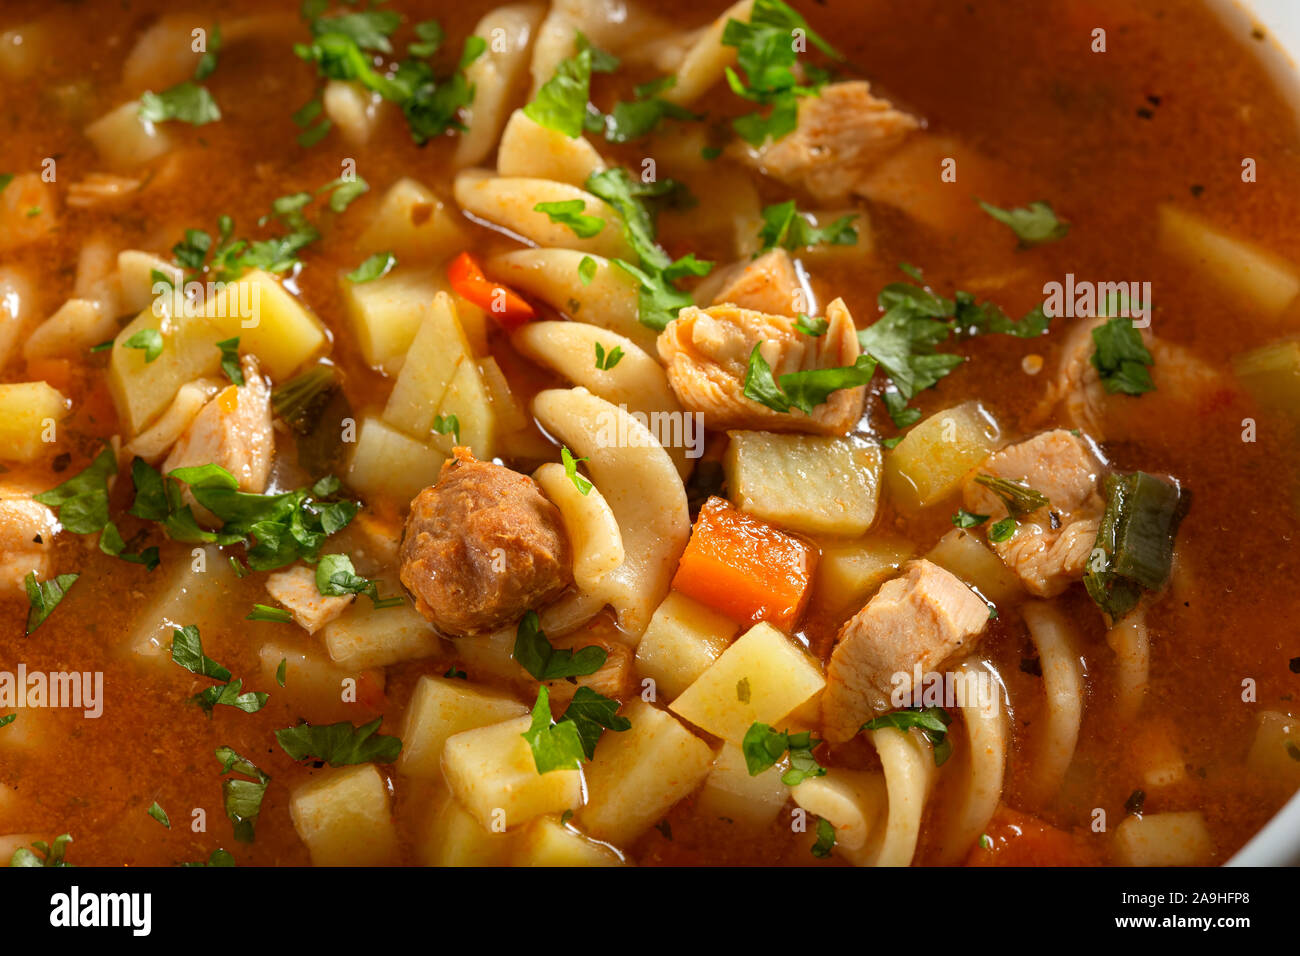 Soup with fusilli, chicken meat and vegetables - close up view Stock Photo